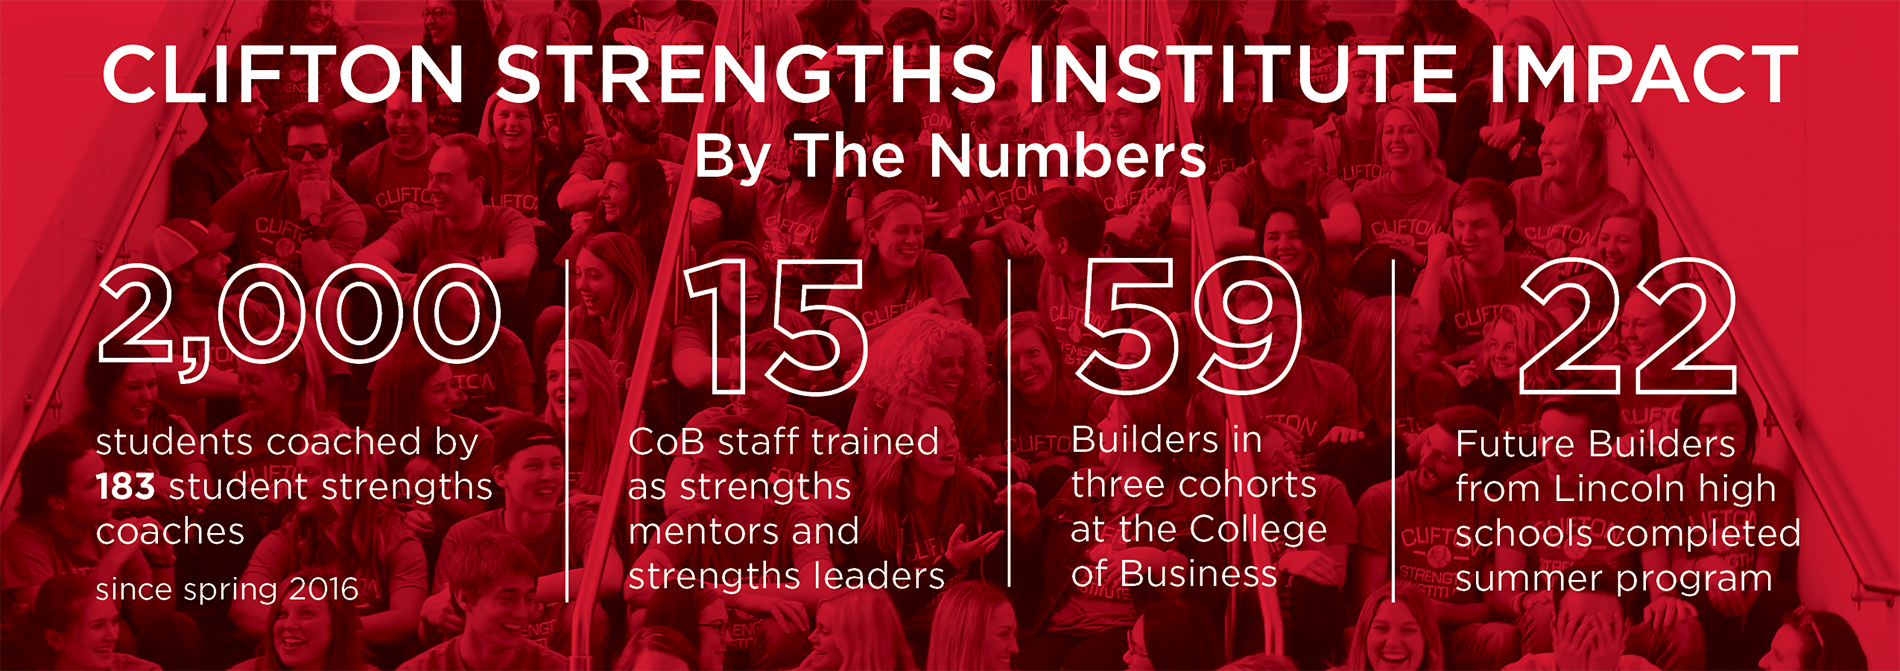 Clifton Strengths Institute Impact by the Numbers